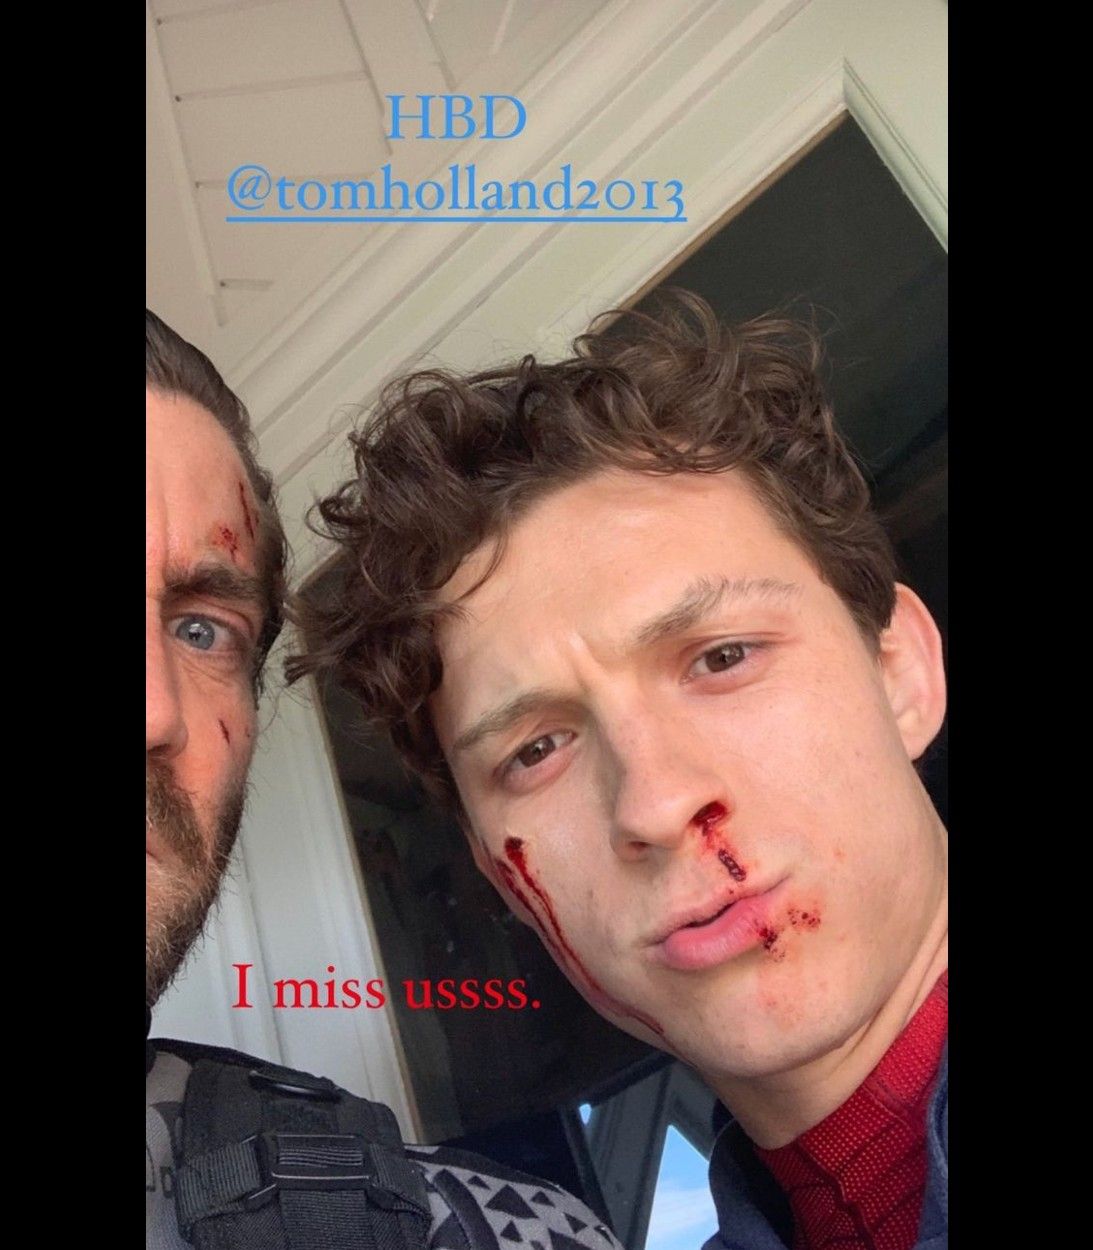 Jake Gyllenhaal Celebrates Tom Holland’s Birthday With A Spider-Man: Far From Home BTS Image